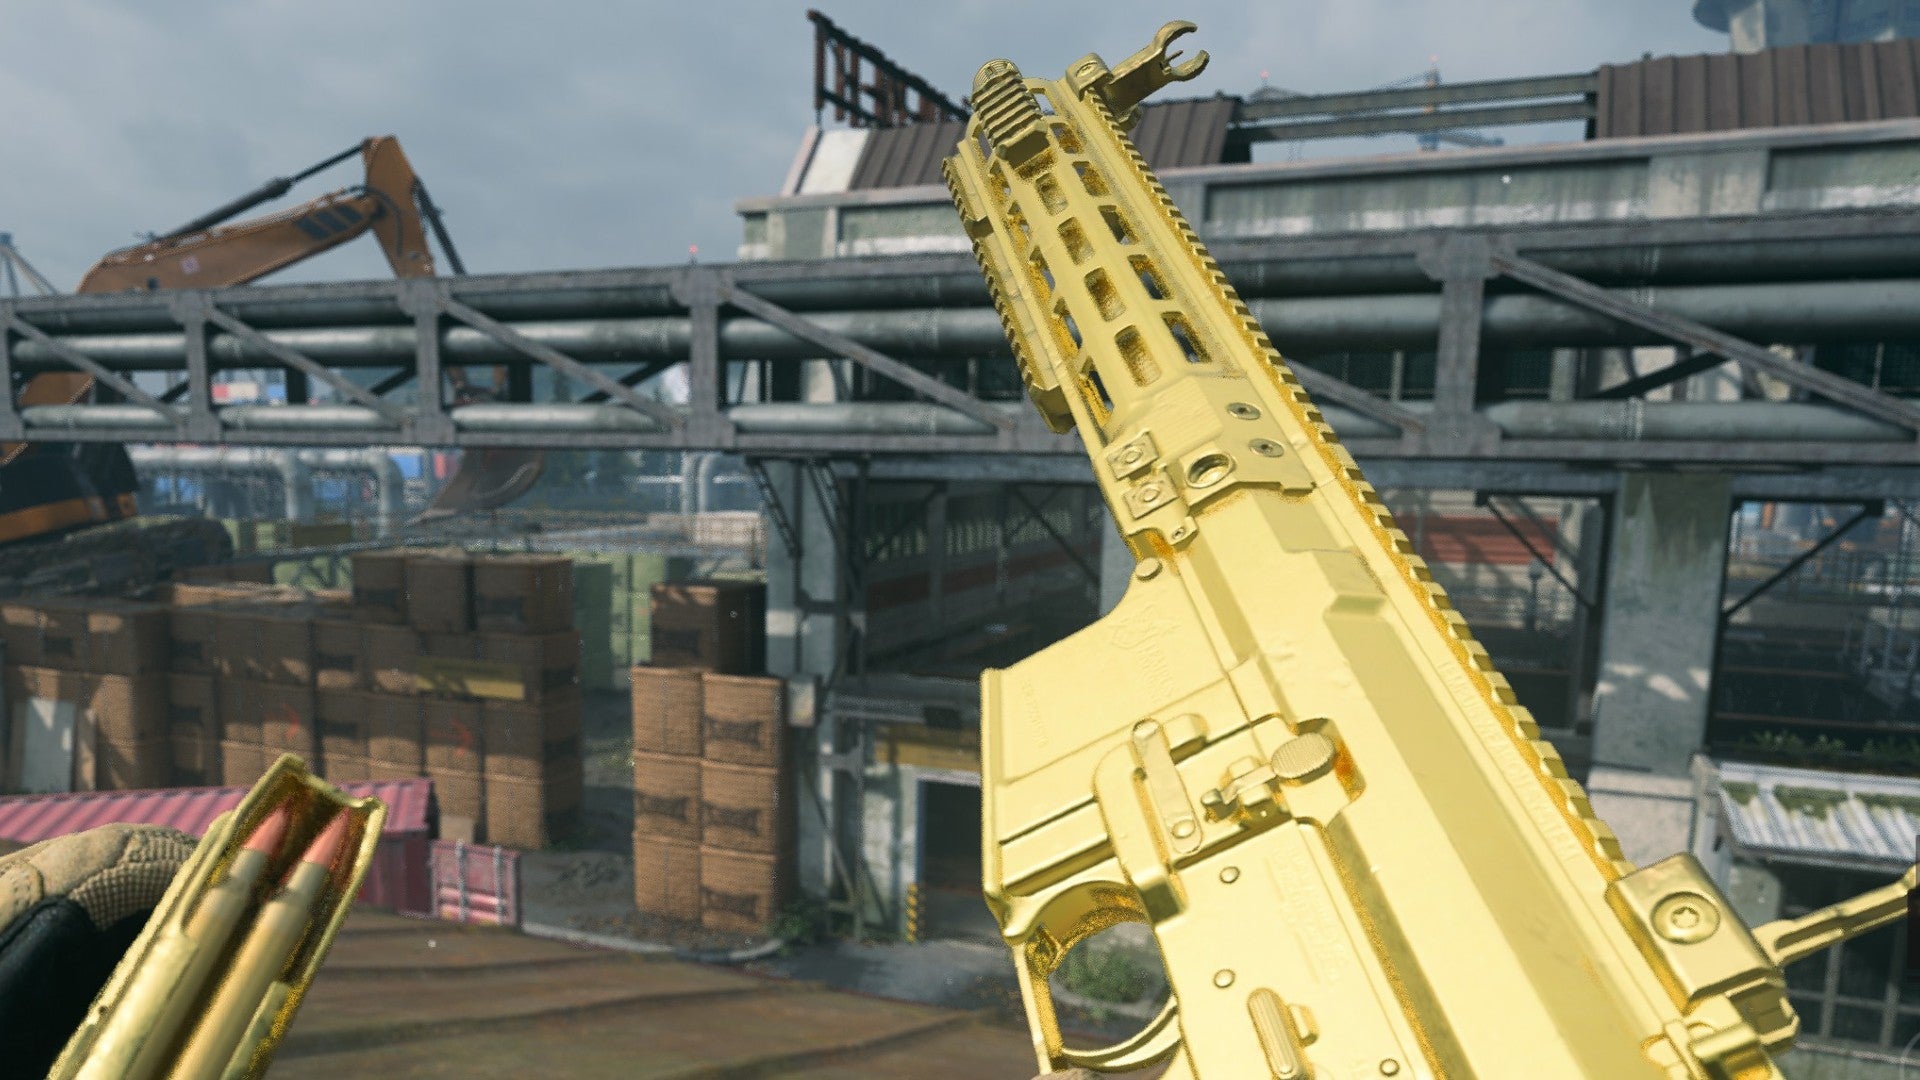 Warzone 2 image showing the M4 looking very pretty and gold, as the player stands on a rooftop overlooking a large warehouse.